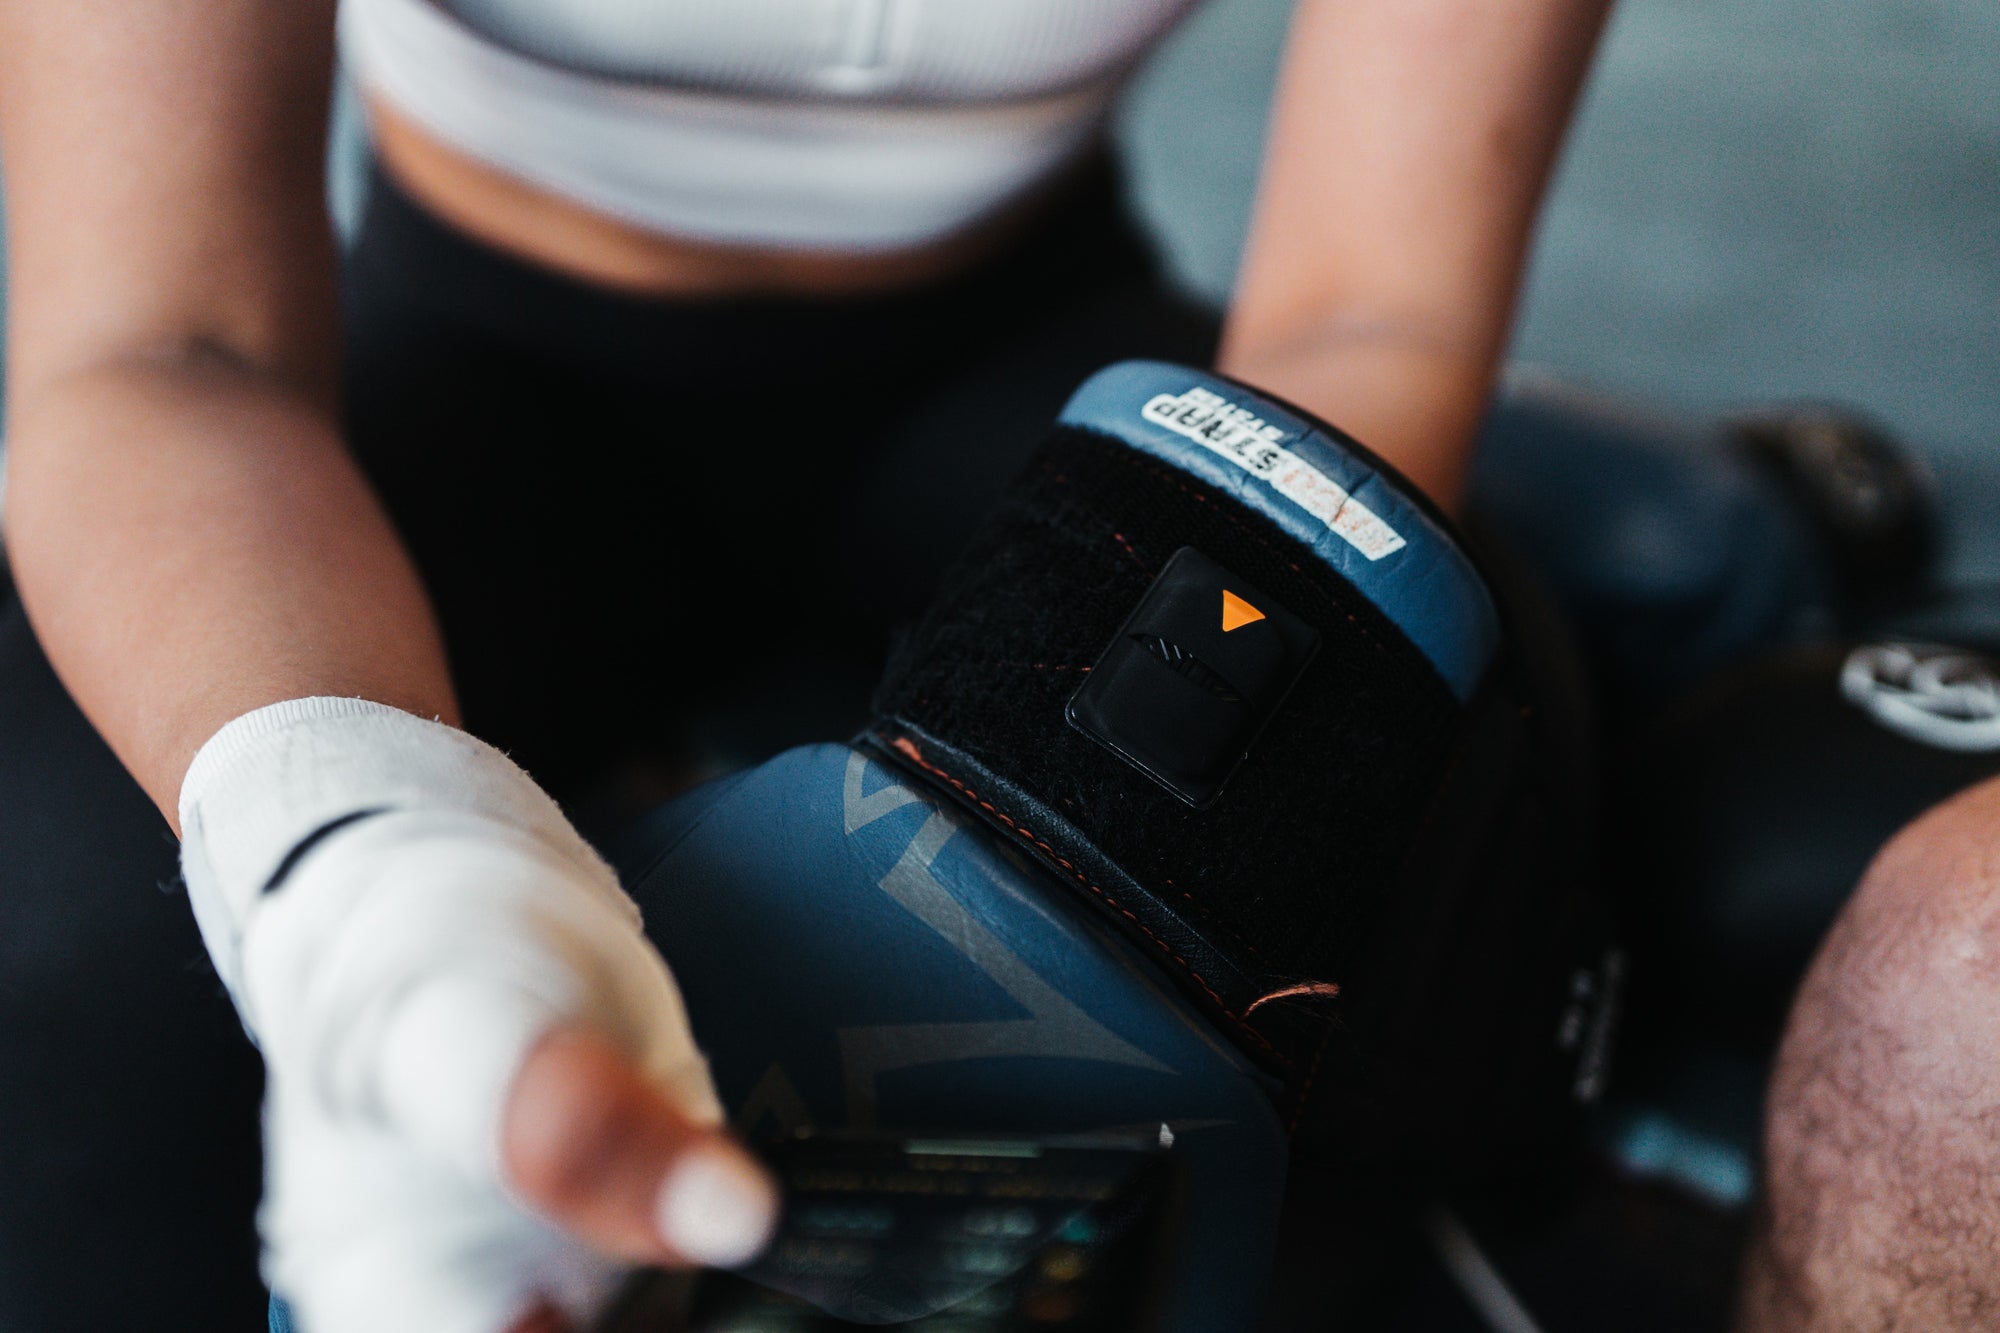 POWA Boxing Sensors Attached to Gloves Via Velcro Pouch